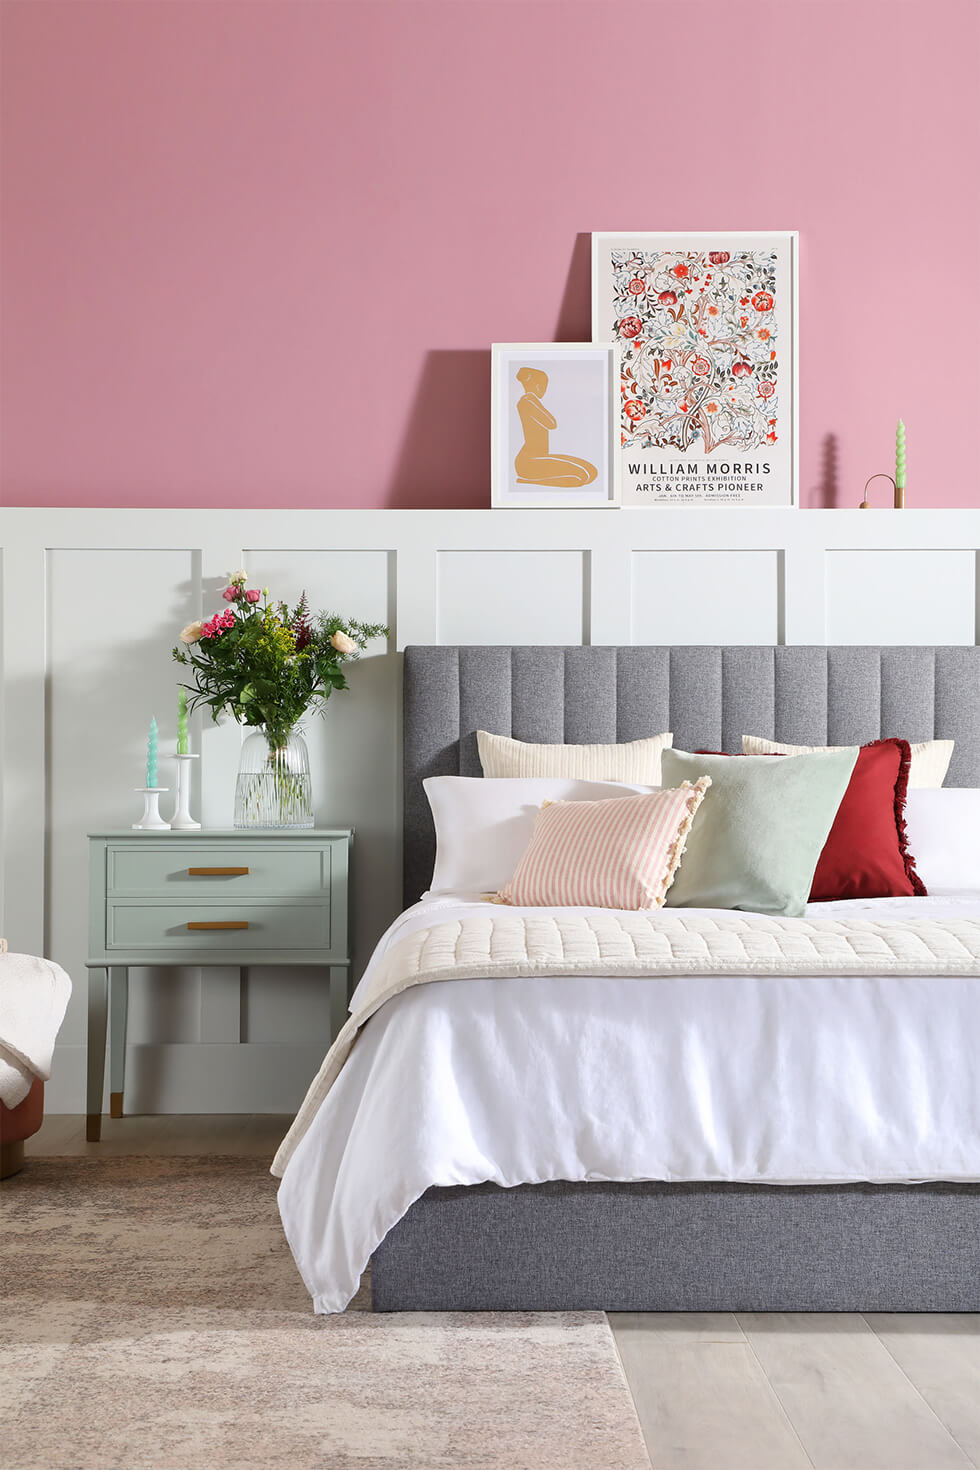 Styling dreamy pastels in a modern home